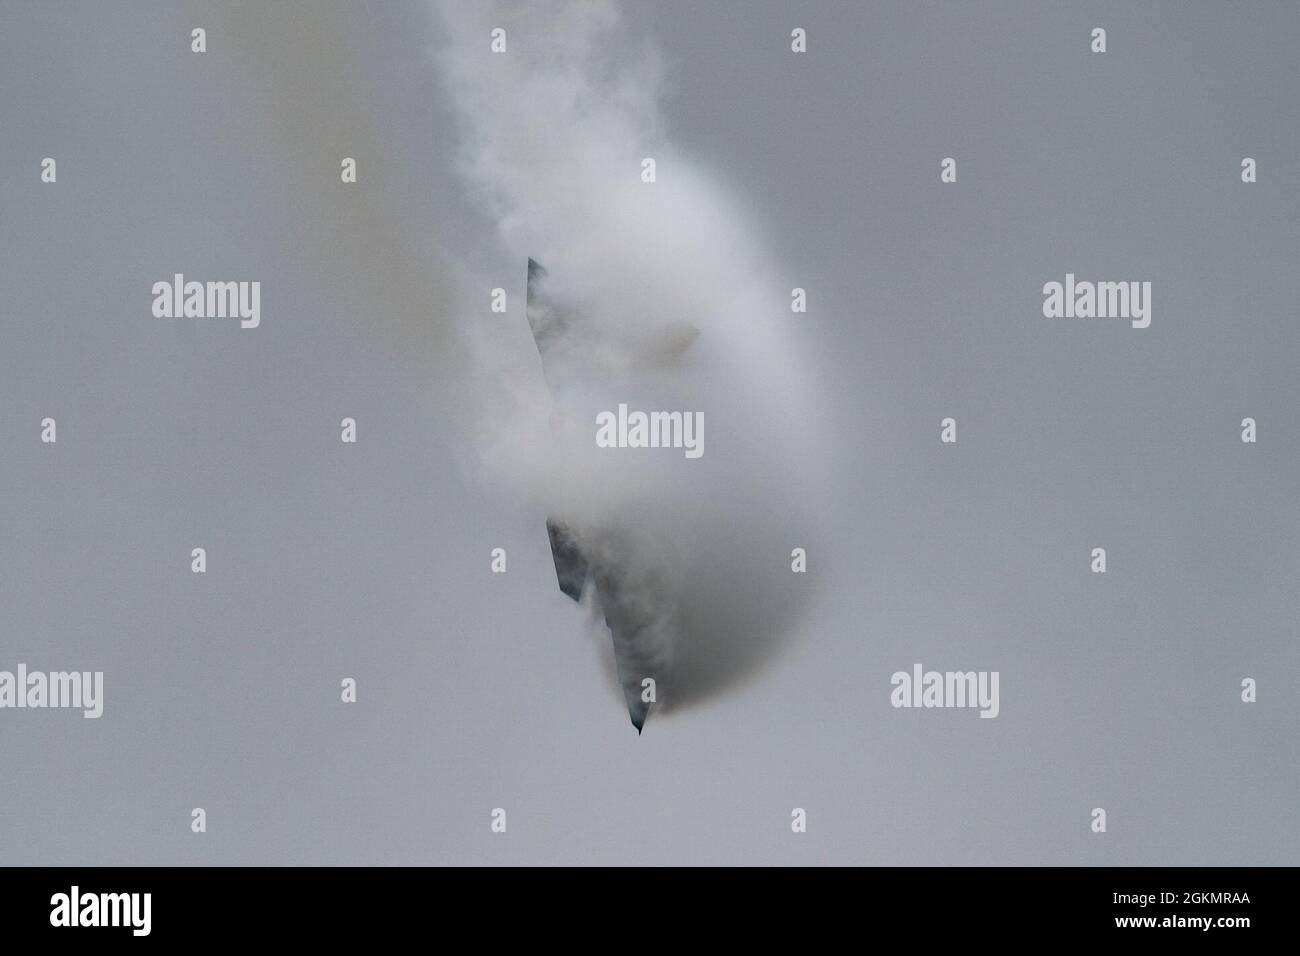 U.S. Air Force Maj. Josh Gunderson, F-22 Raptor Demo Team commander, performs a Tactical Pitch during a demonstration at the Westmoreland County Airshow in Latrobe, Pennsylvania, May 29, 2021. The cloud that forms across the aircraft is due to a change in air pressure across the wing causing the moisture to condense into a visible vapor cloud. Stock Photo